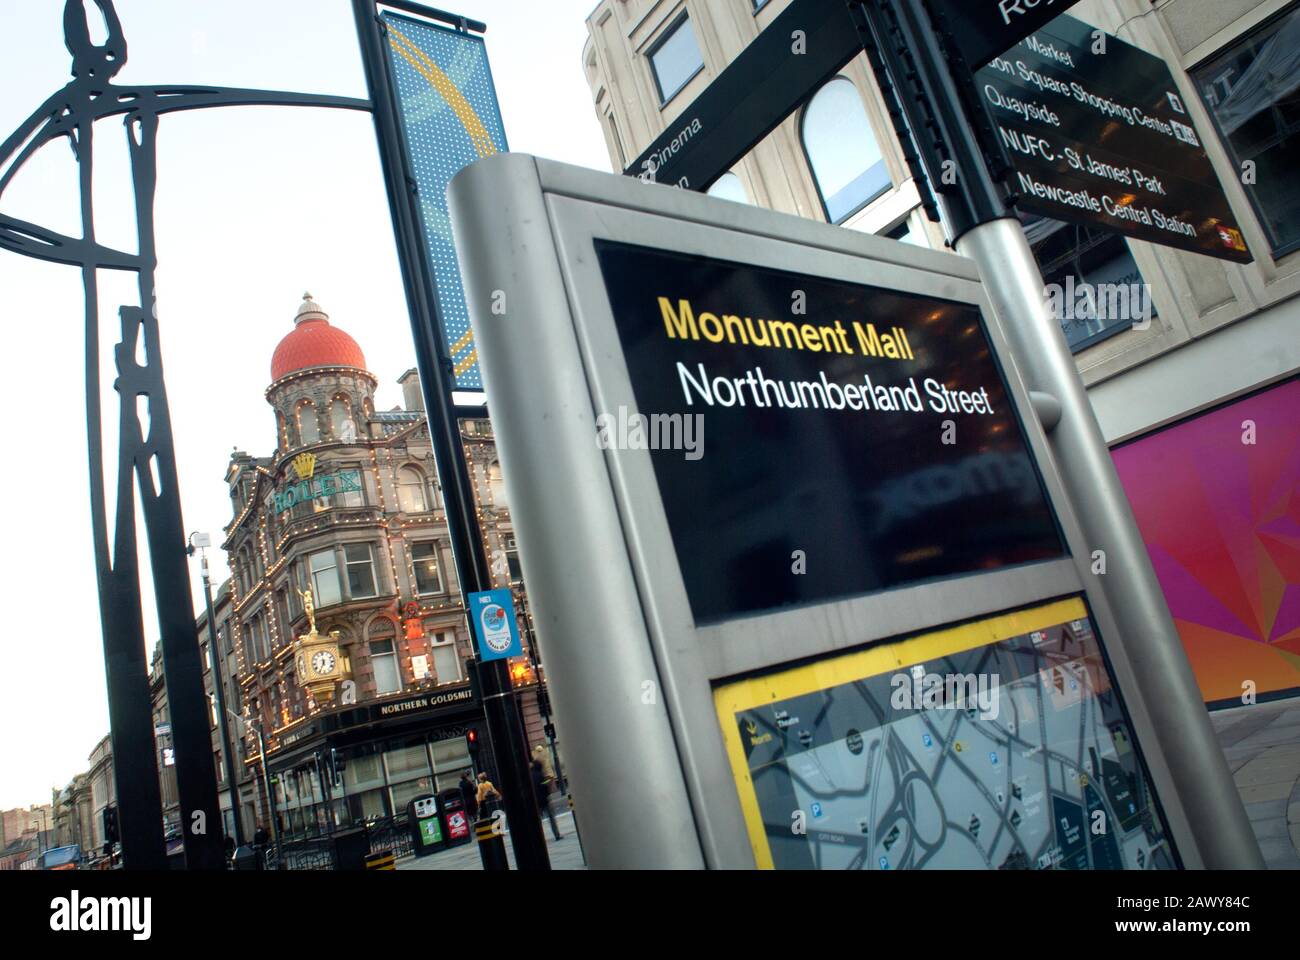 Information sign, Monument Mall and Northumberland Street, Newcastle-upon-Tyne Stock Photo